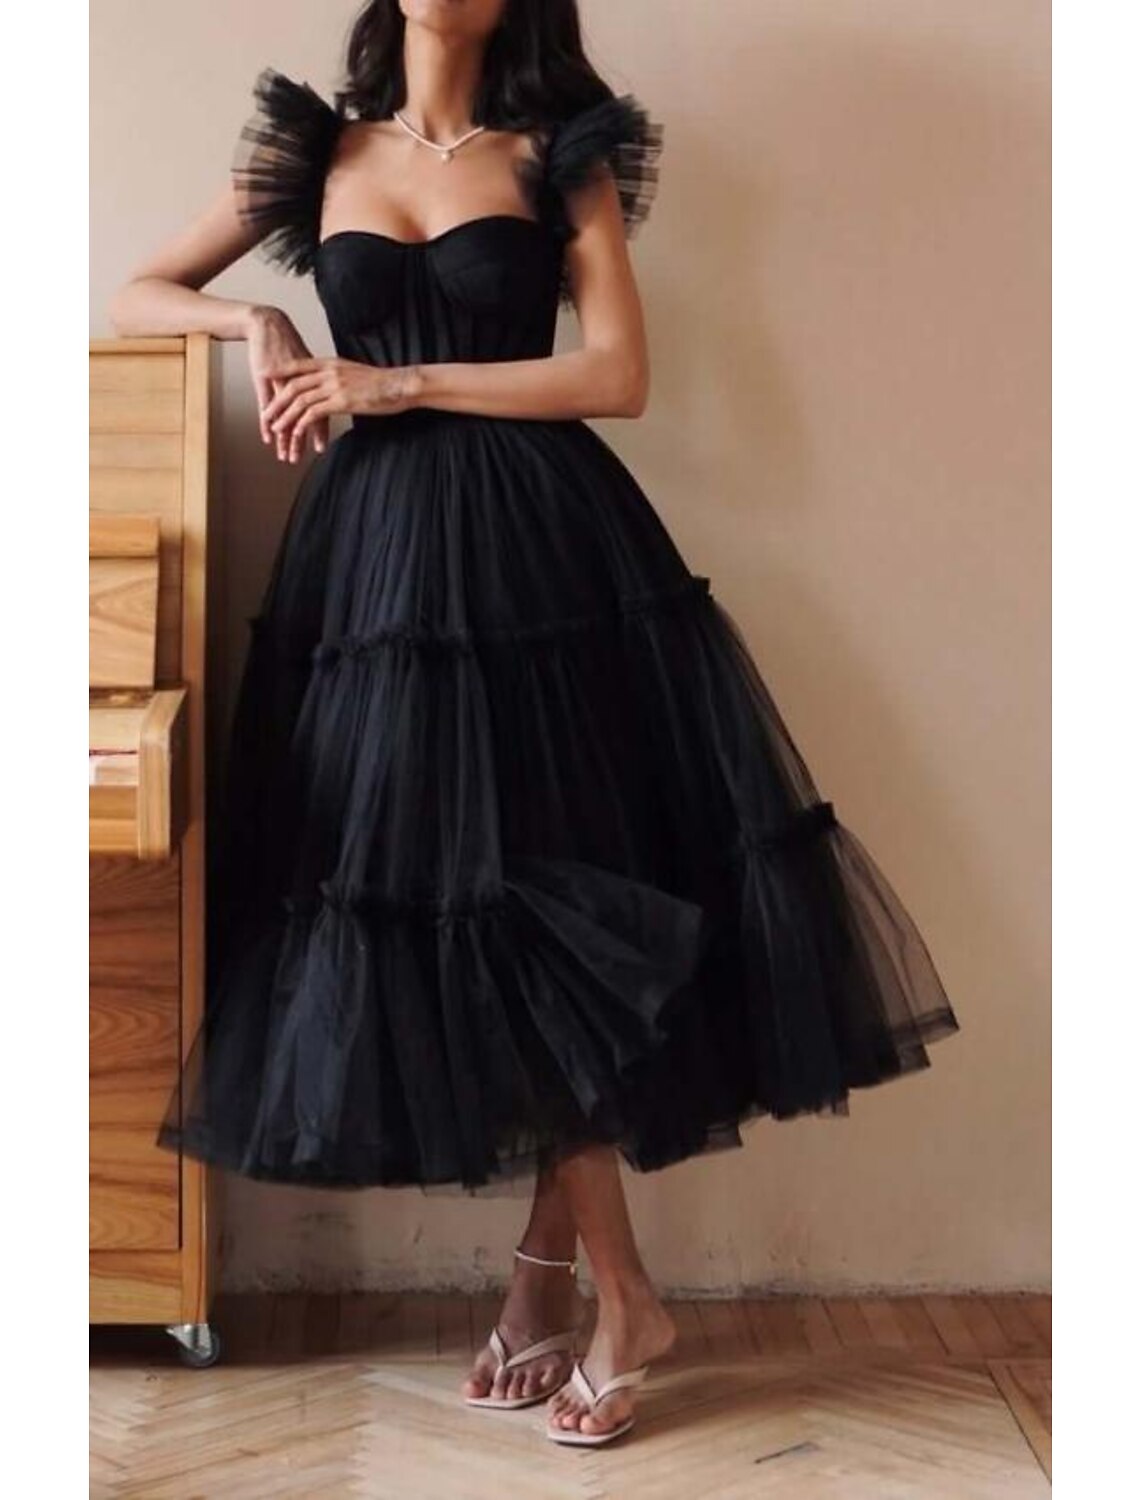 A-Line Prom Dresses Gothic Dress Masquerade Ankle Length Sleeveless Sweetheart Wednesday Addams Family Tulle Crisscross Back with Pleats Ruffles